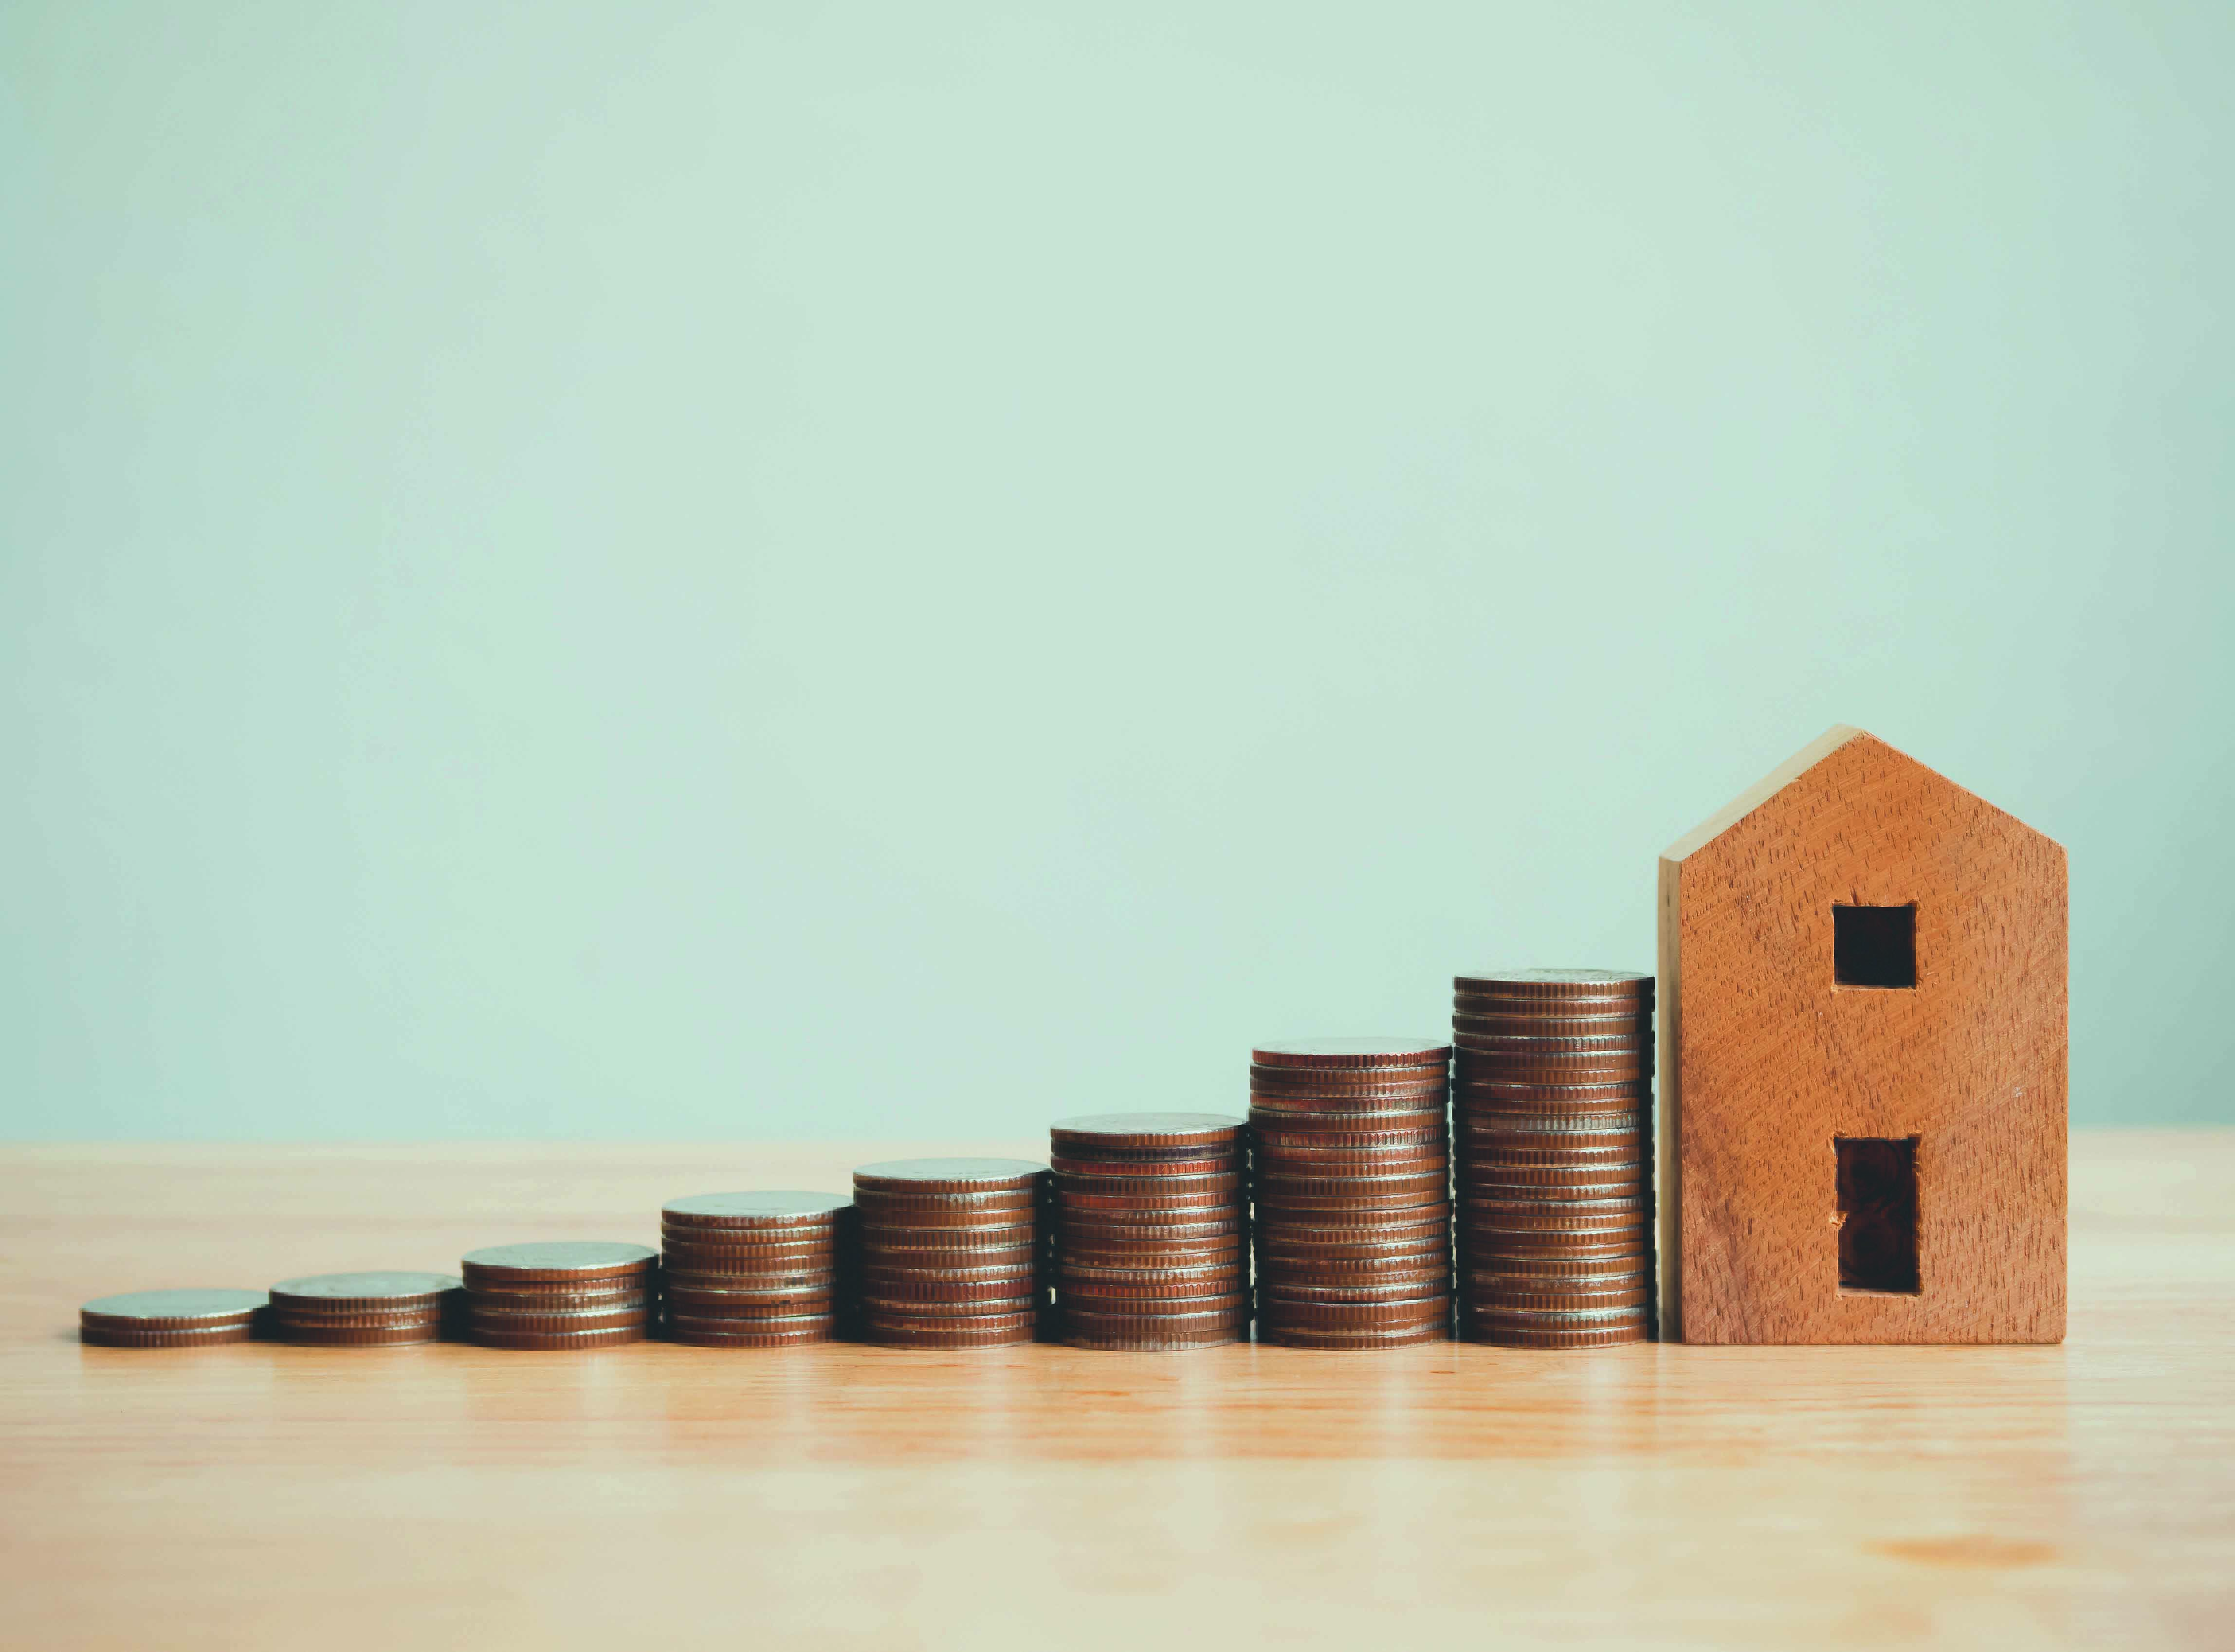 Property investment real estate and house mortgage financial concept, Money coin stack with wooden house